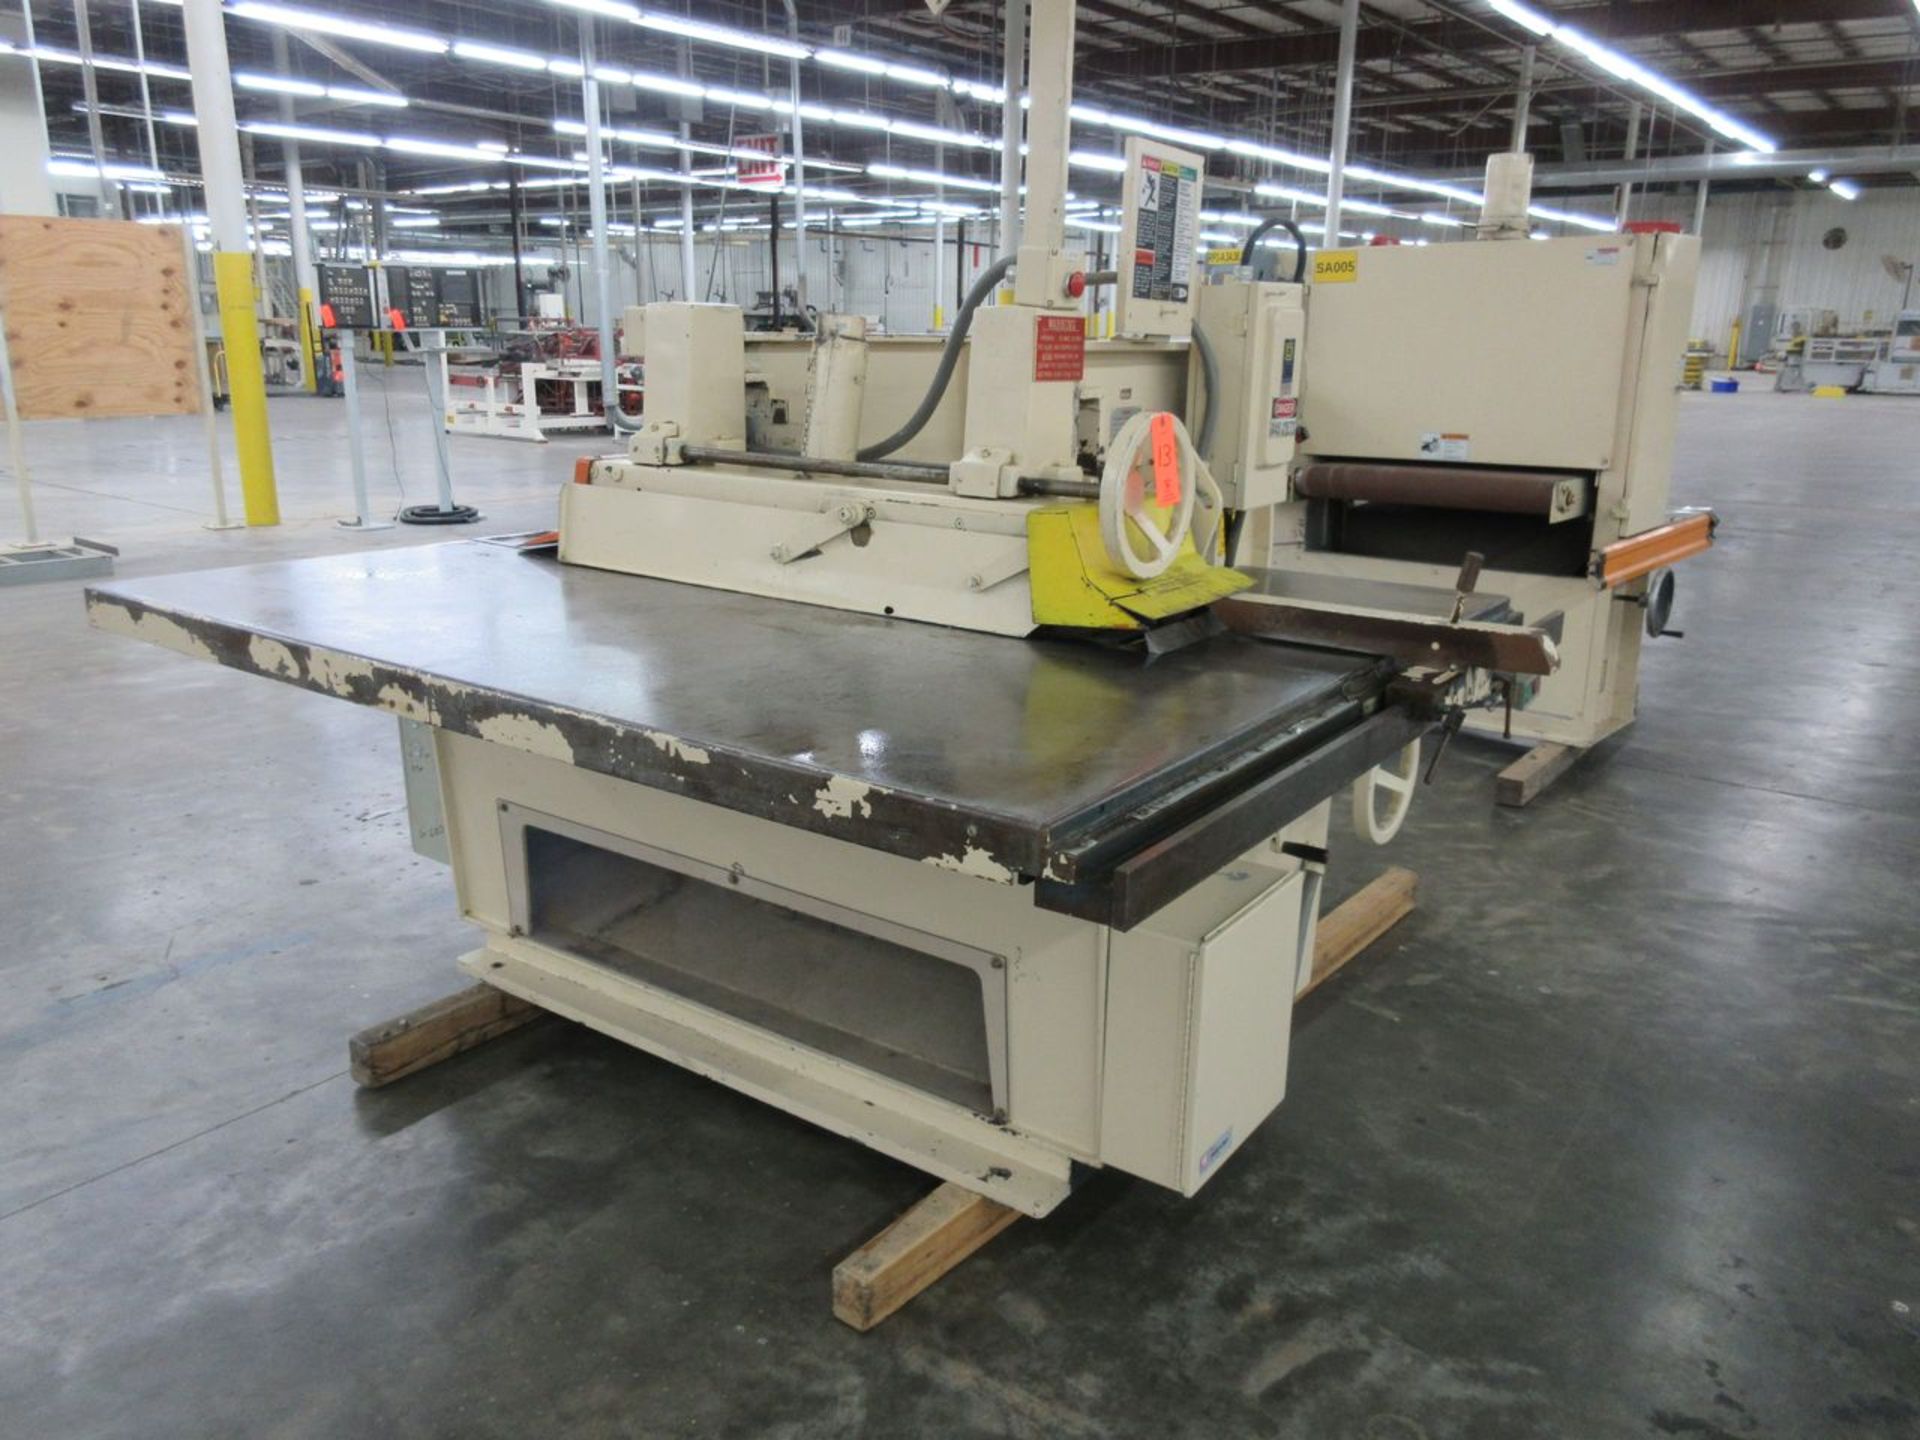 Diehl Model SL-52 Straight Line Chain-Fed Rip Saw, S/N: 10/85M4860-4276; with 25 in. Throat, 15-HP - Image 3 of 7